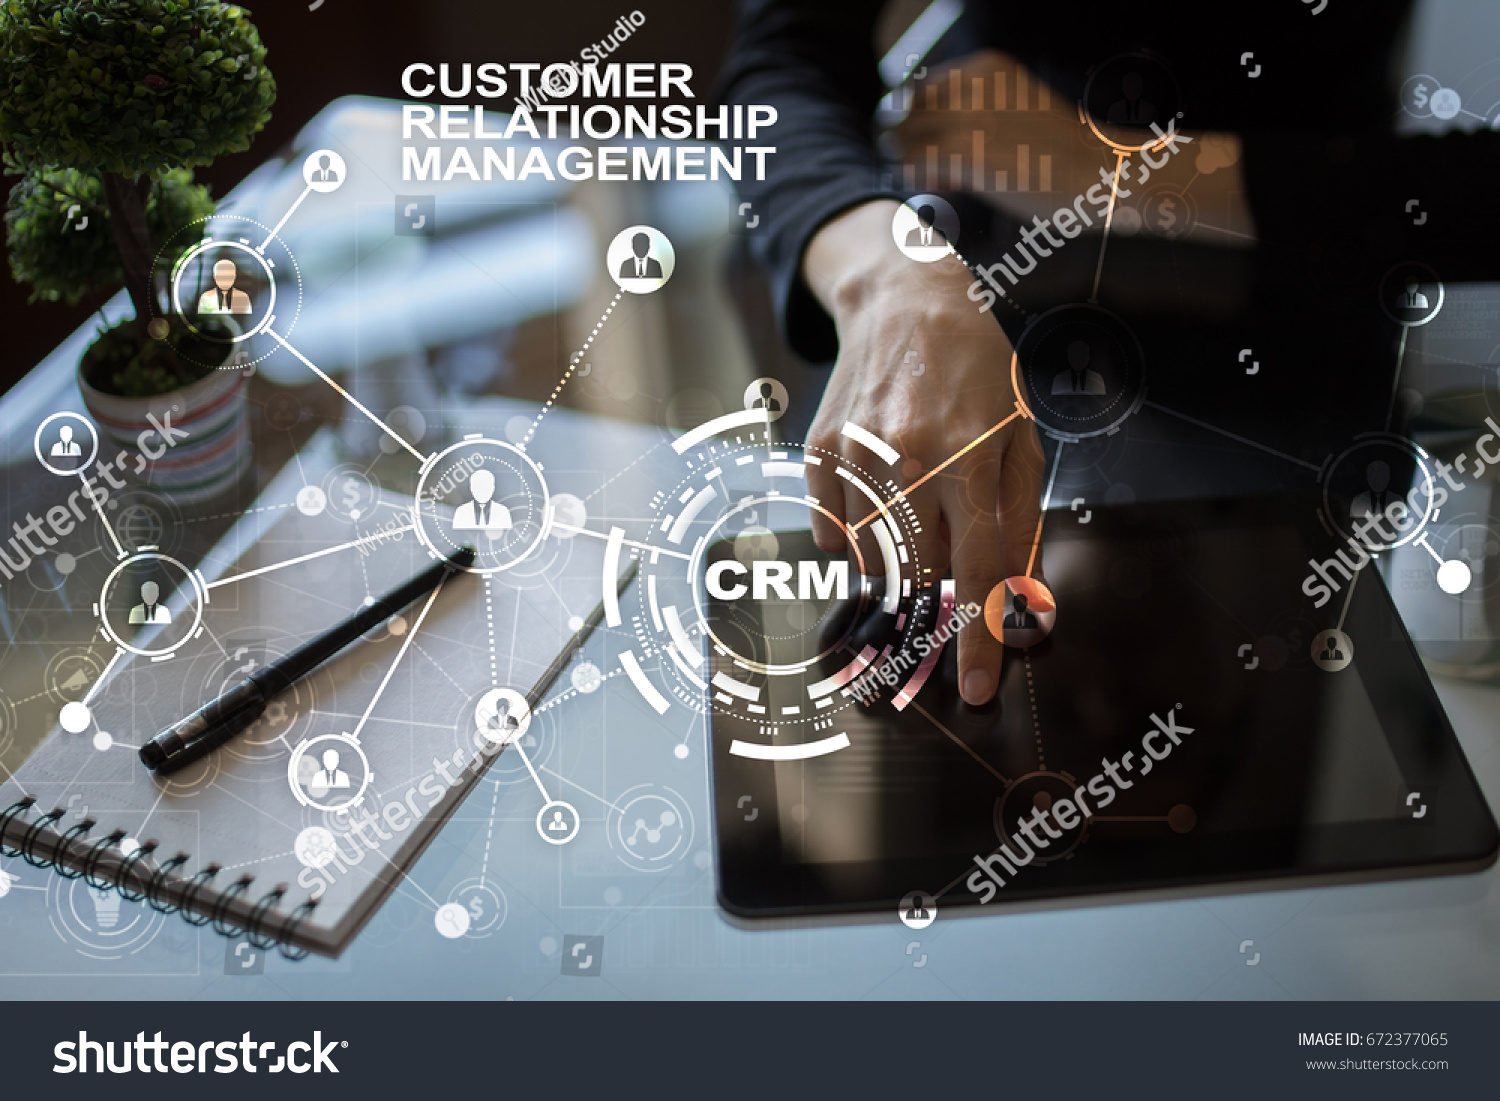 CRM. Customer relationship management concept. Customer service and relationship. #672377065